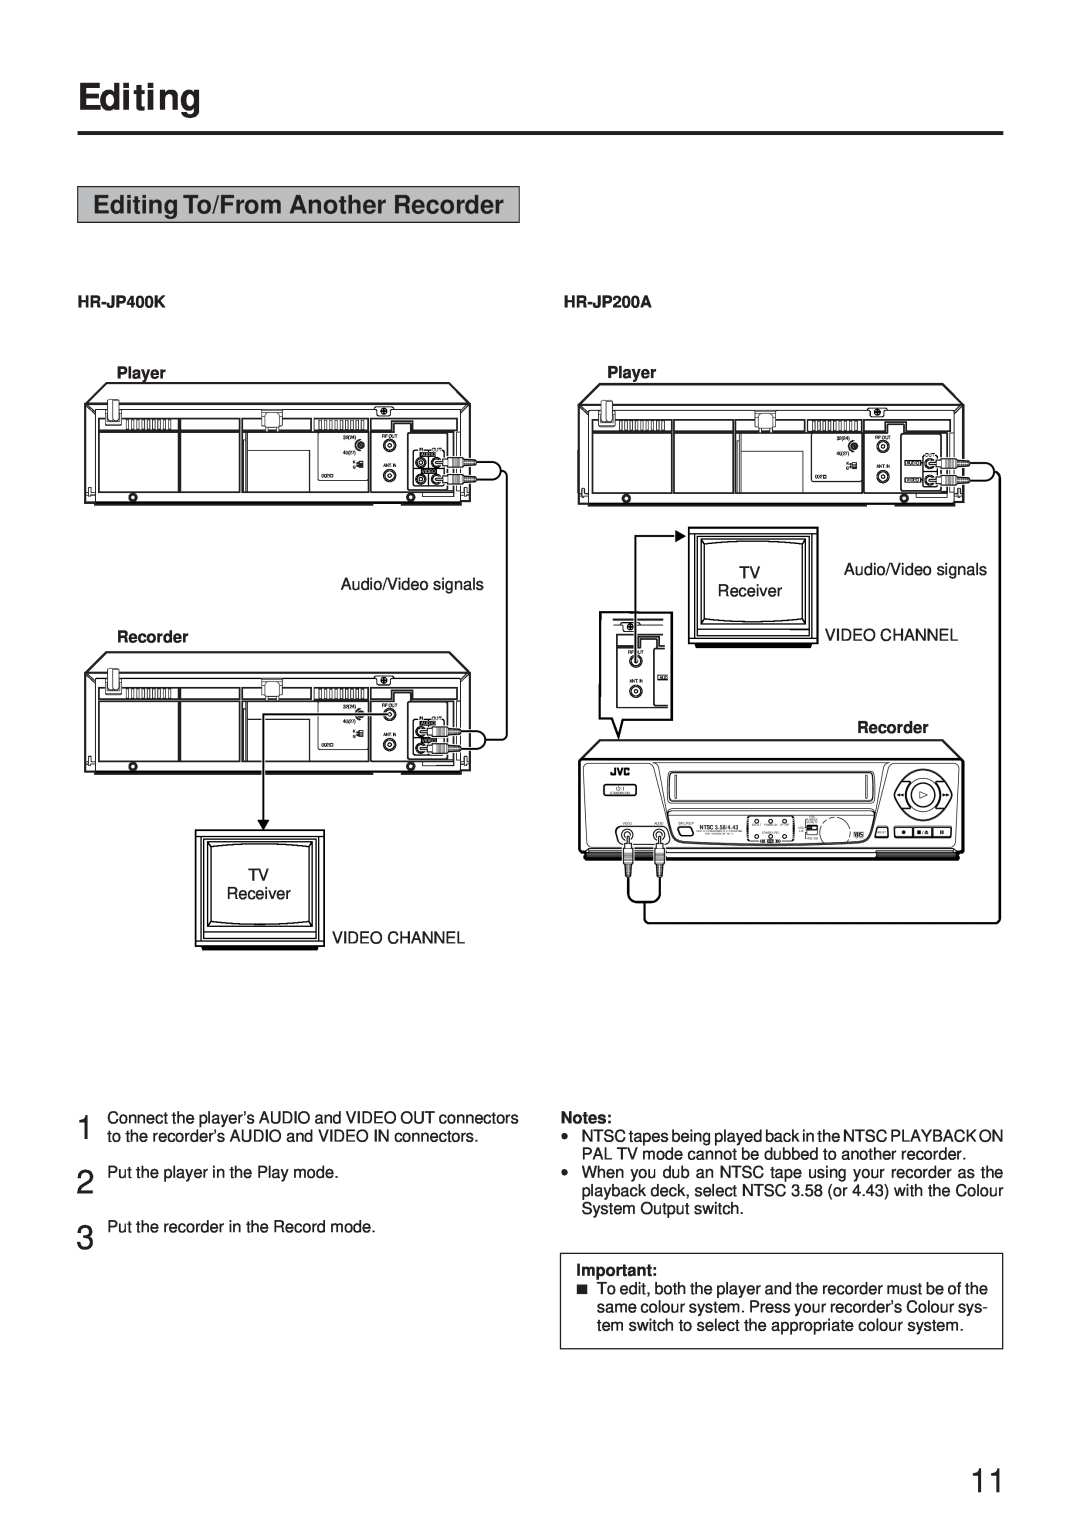 JVC LPT0416-001A, HR-JP200A, HR-JP400K instruction manual Editing To/From Another Recorder 